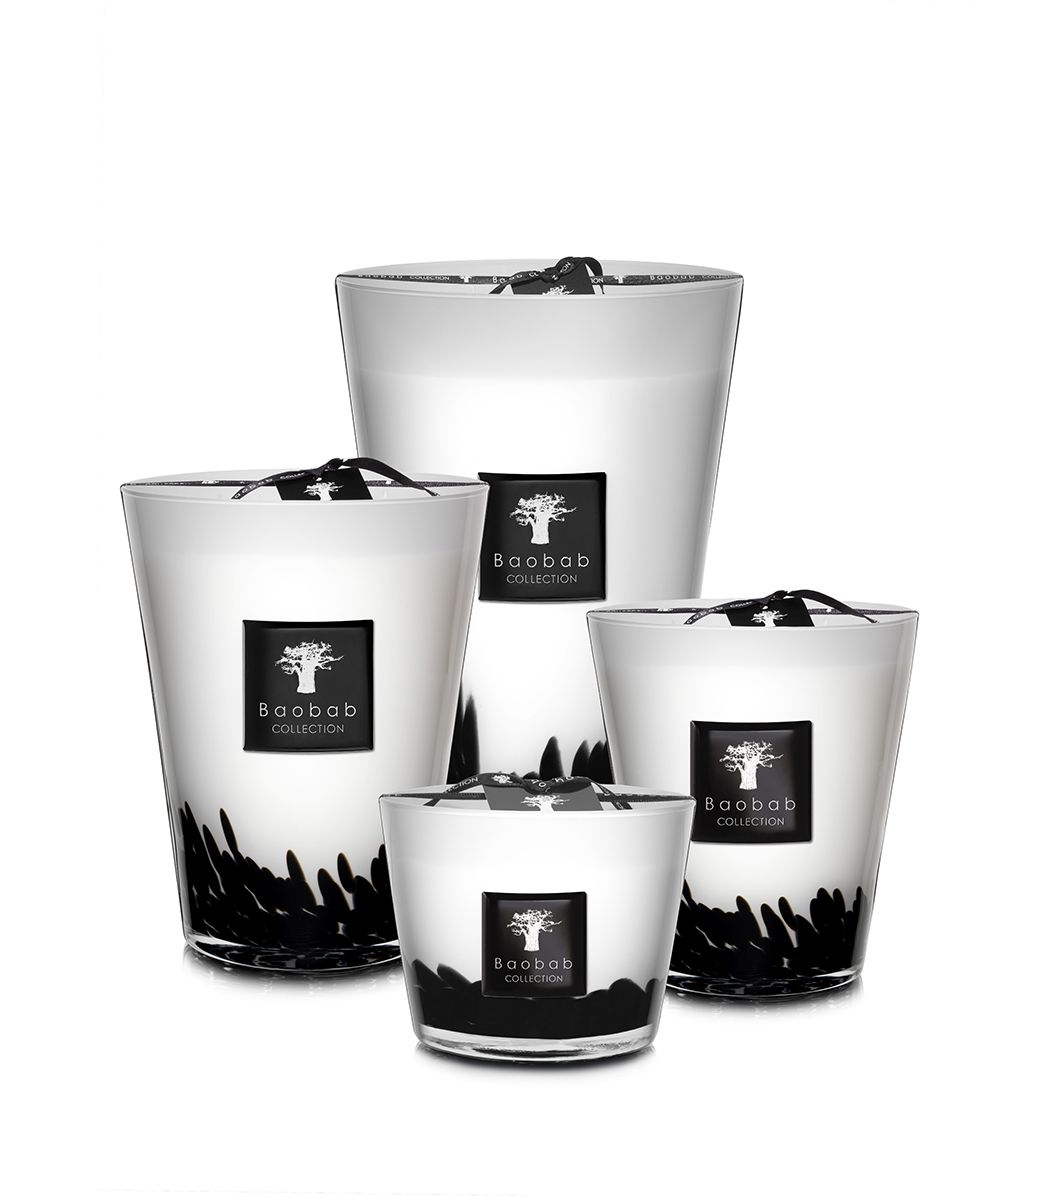 Voorzitter onwettig dorp Baobab Collection Feathers Max 24 Candle – The Beauty Box